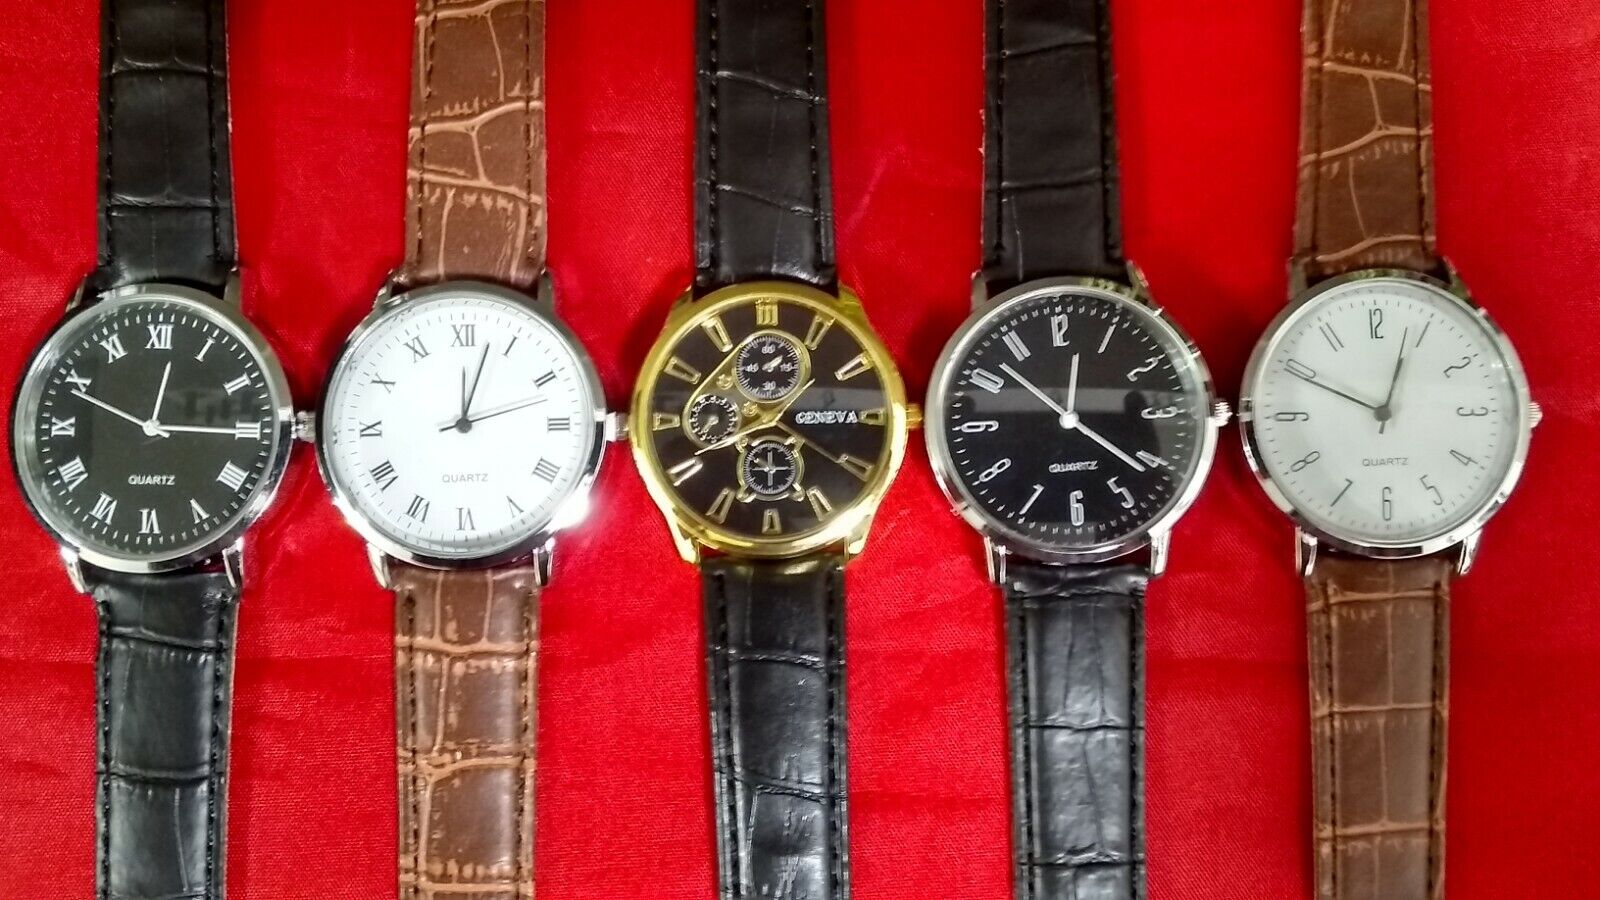 5 Brand NEW Men's Watches 10 FREE SPARE BATTERIES lot Watch  # 43211234 Unbranded - фотография #4